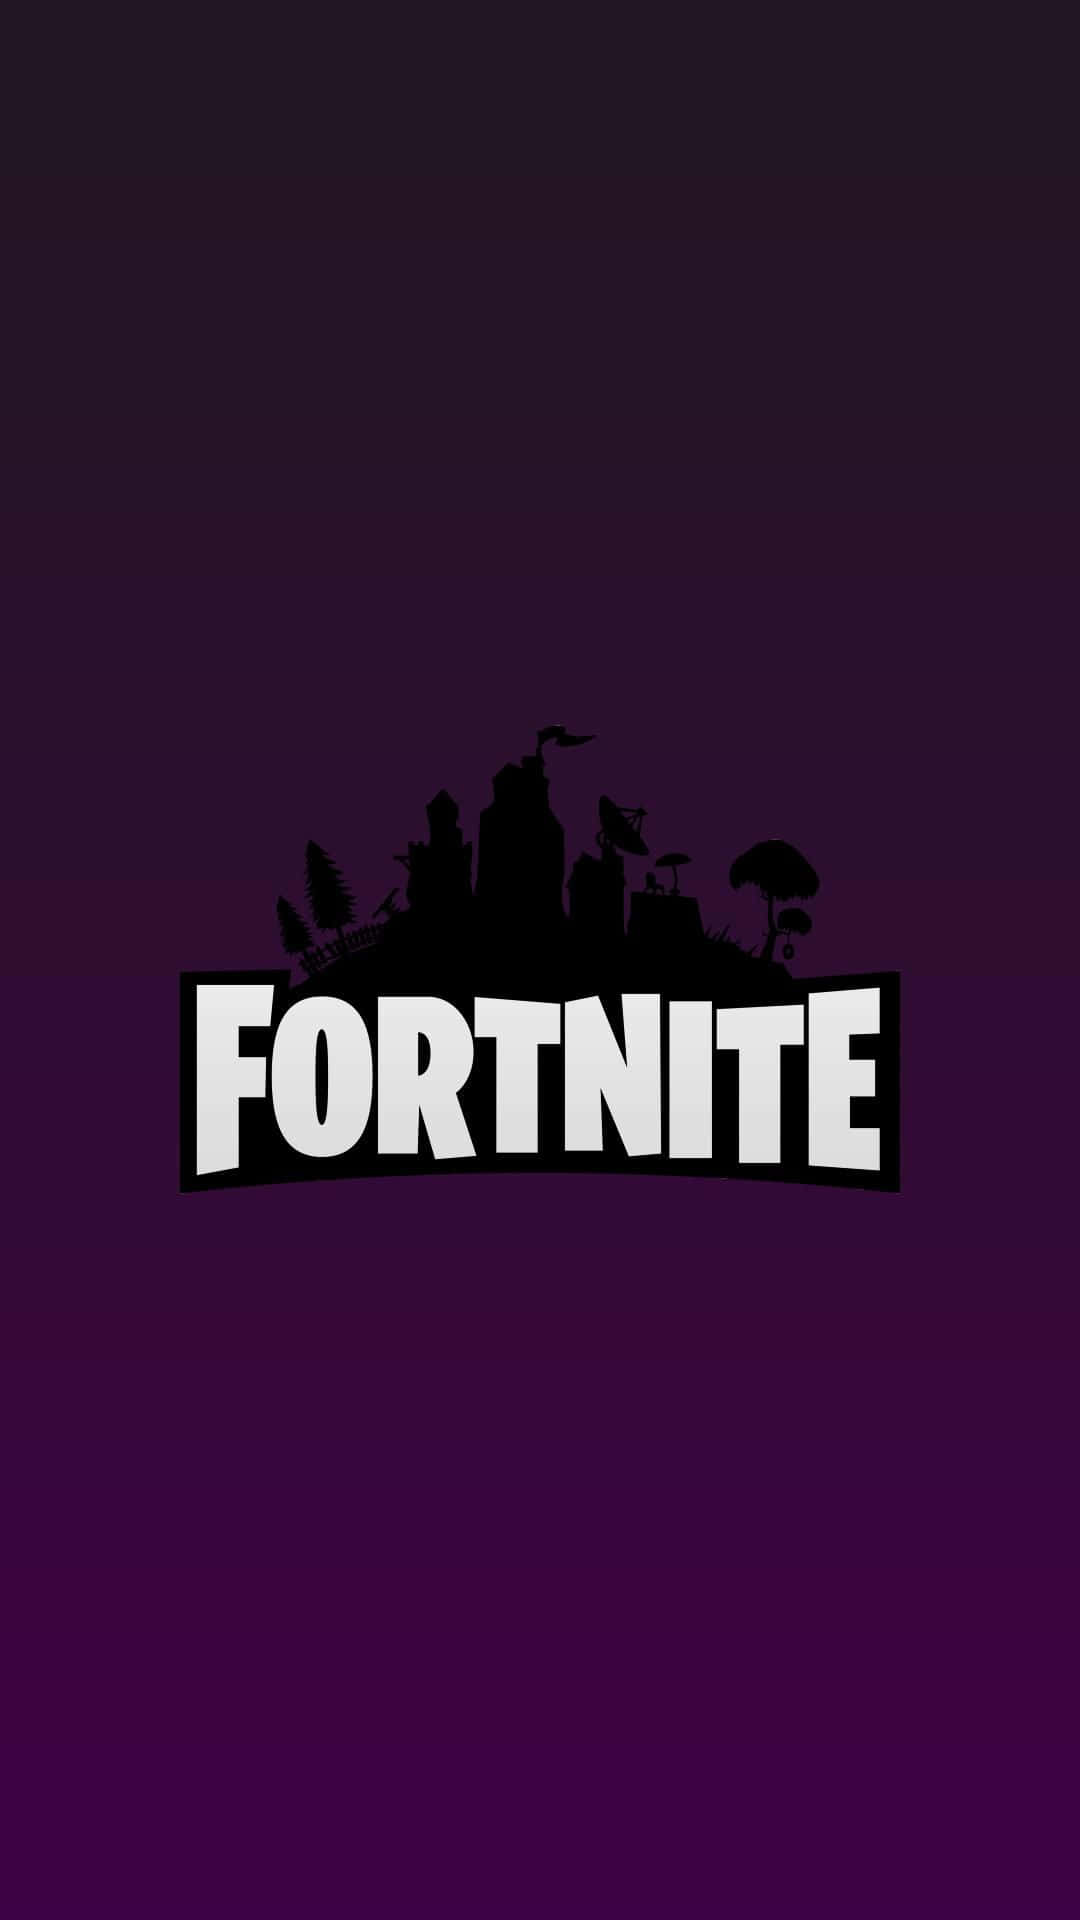 Check out this cool Fortnite Logo! Wallpaper